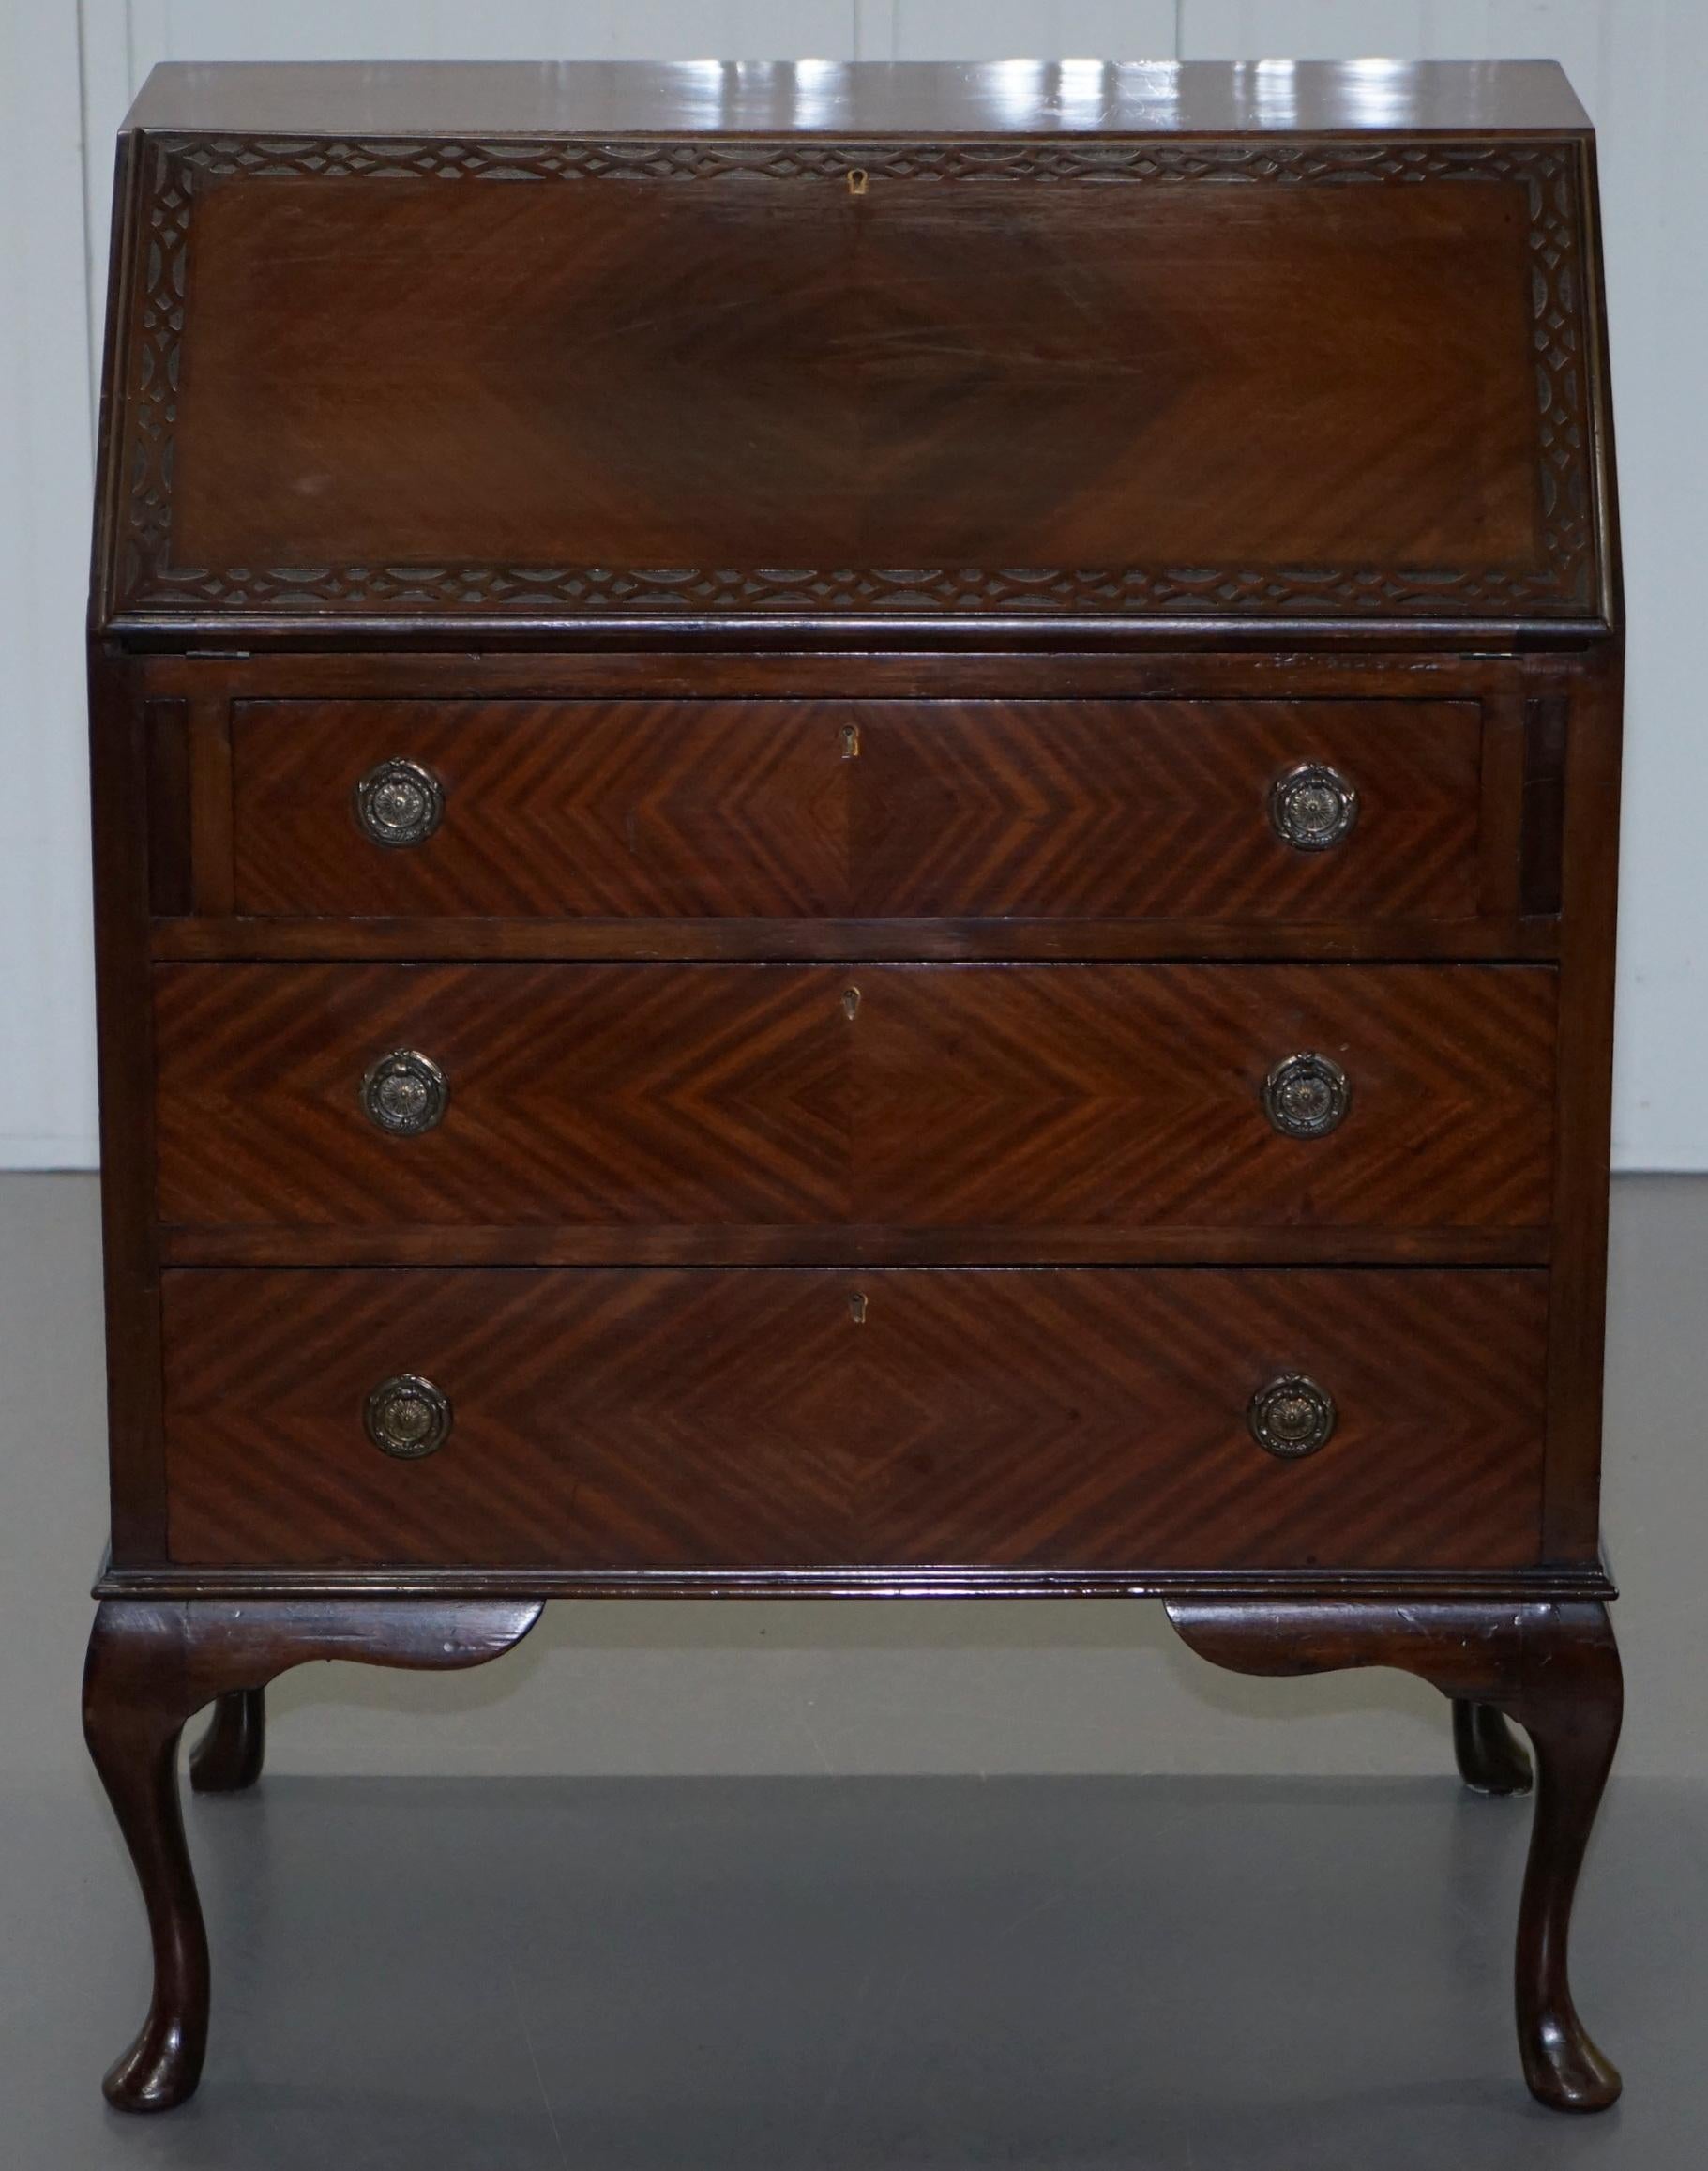 We are delighted to offer for sale this lovely circa 1900 mahogany drop front bureau in the Thomas Chippendale style

A good looking and well made piece, it has Chippendale style fret work carving, the handles are in the style of Gillows, it is a